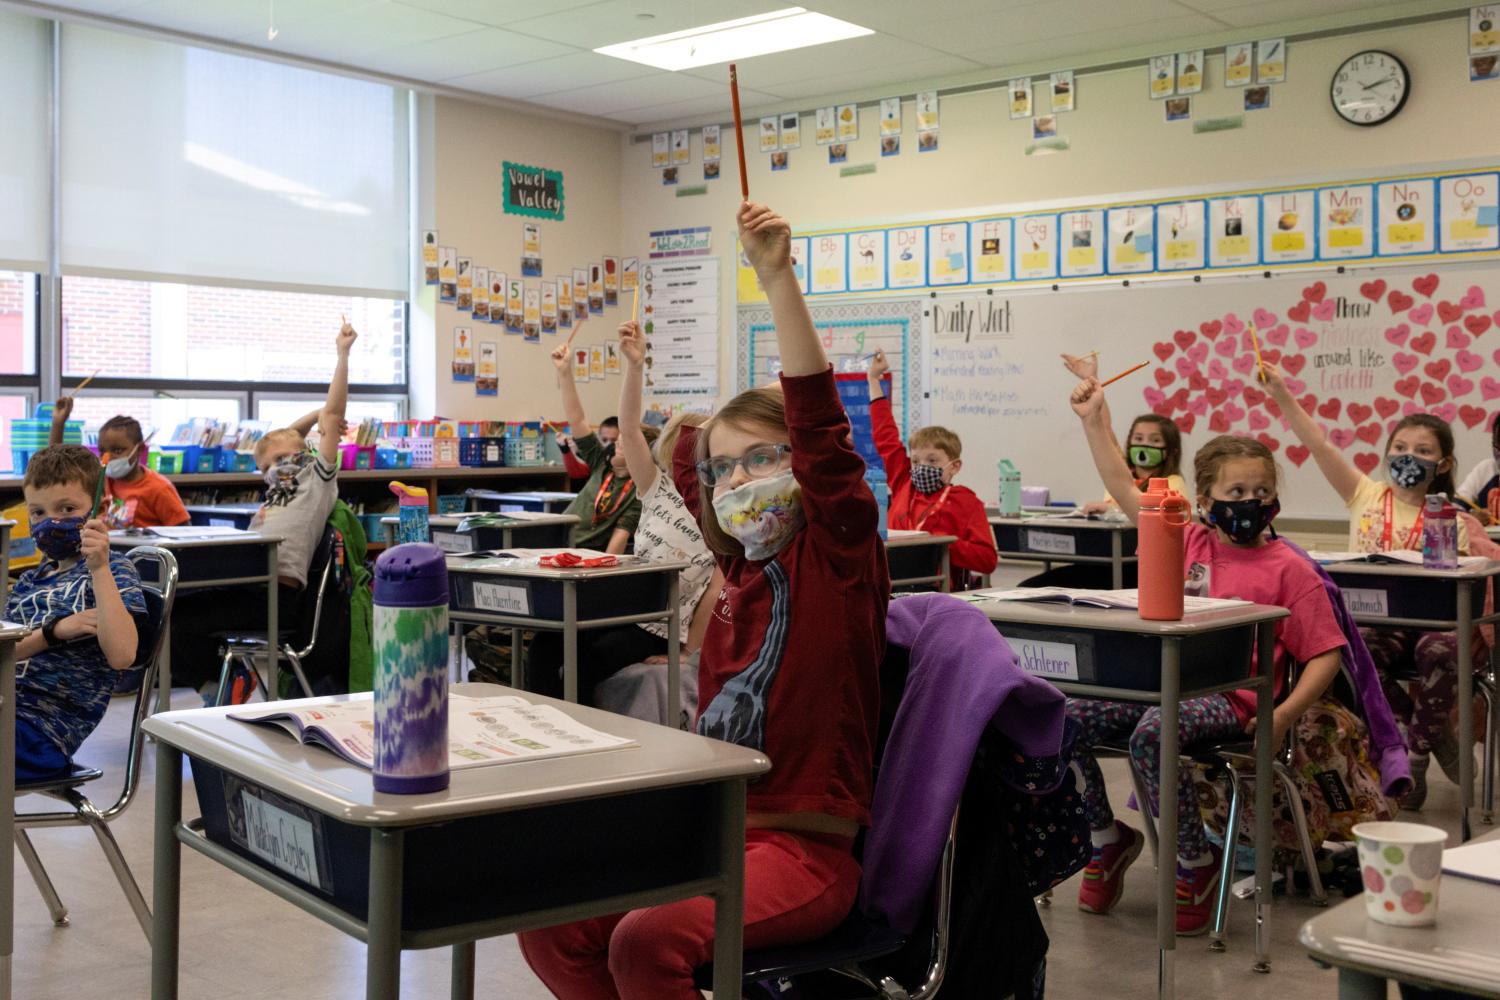 FILE PHOTO: Students raise their hands to answer a question at Kratzer Elementary School in Allentown, Pennsylvania, U.S., April 13, 2021.  REUTERS/Hannah Beier/File Photo